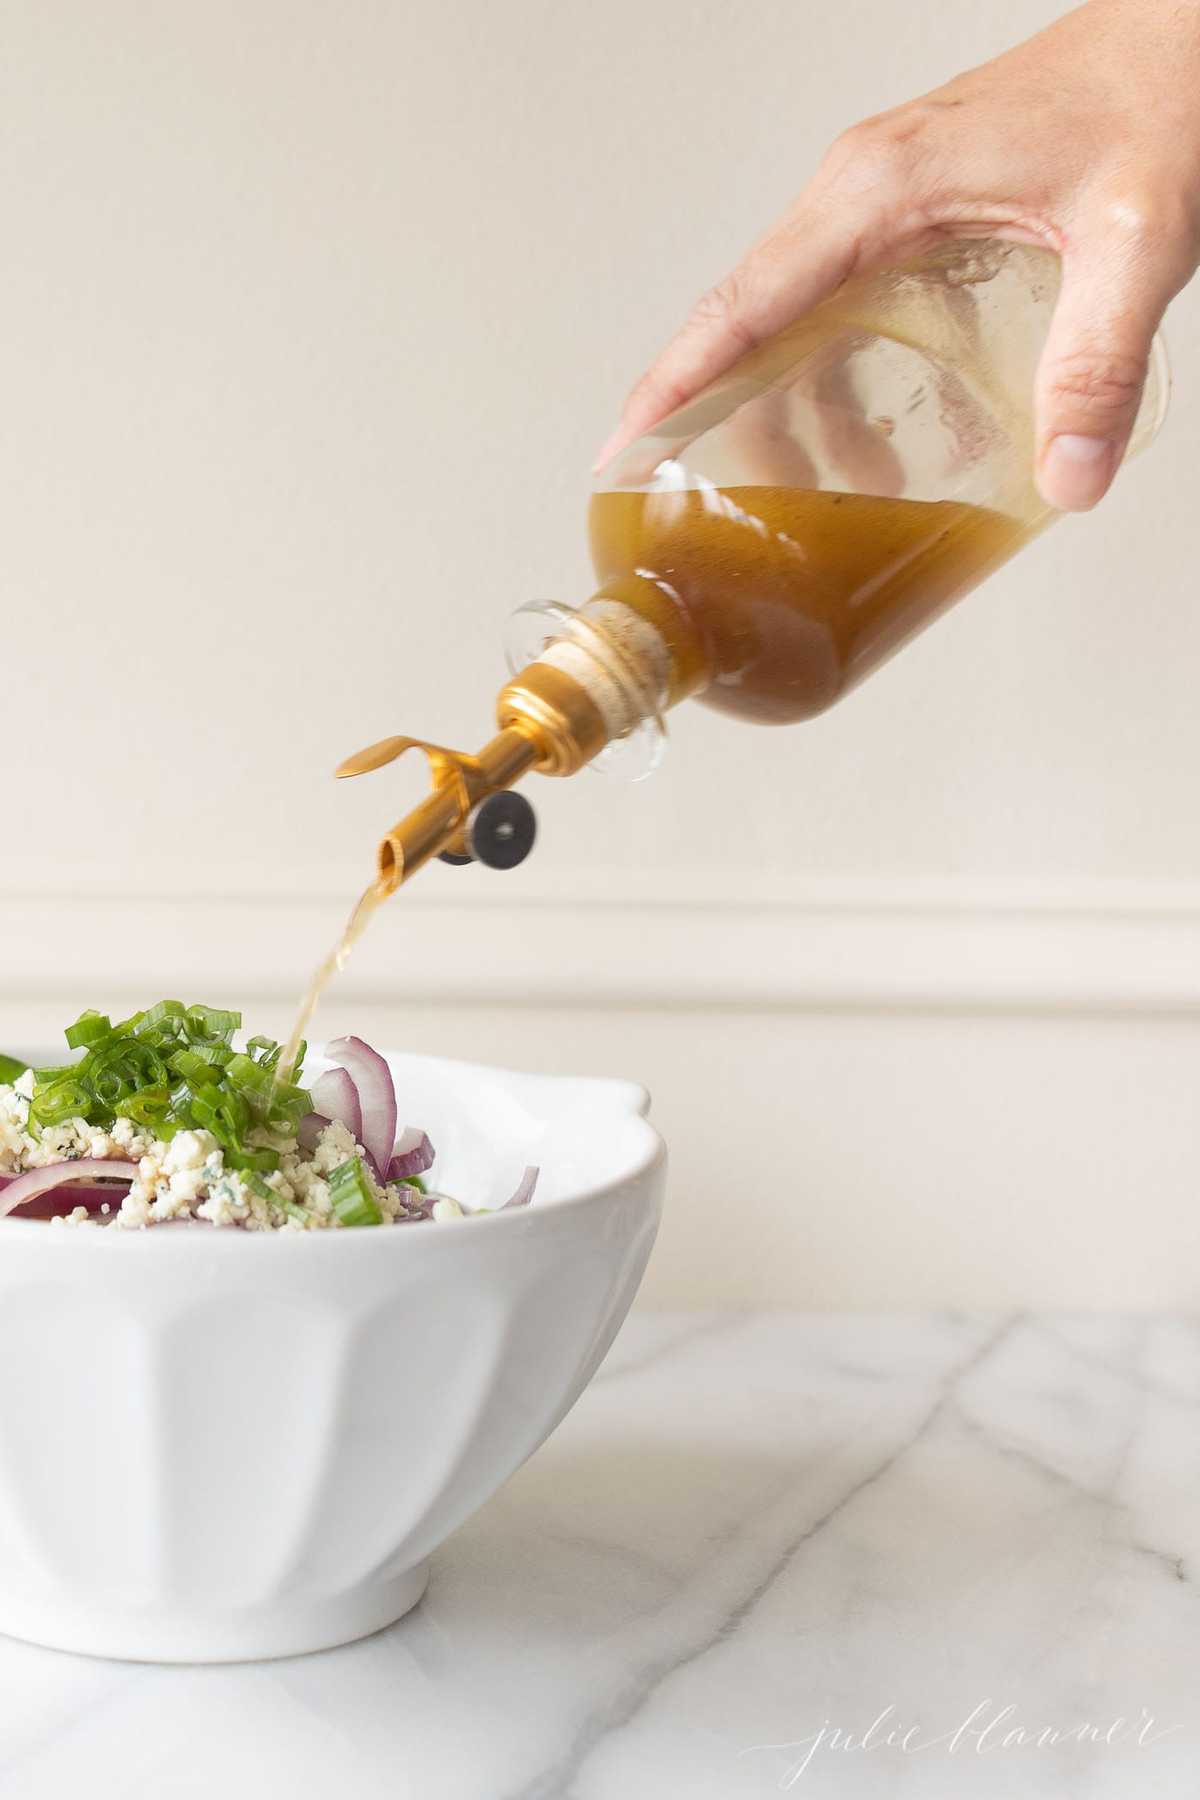 Bottle of Sherry Vinaigrette pouring over a salad in a white bowl.